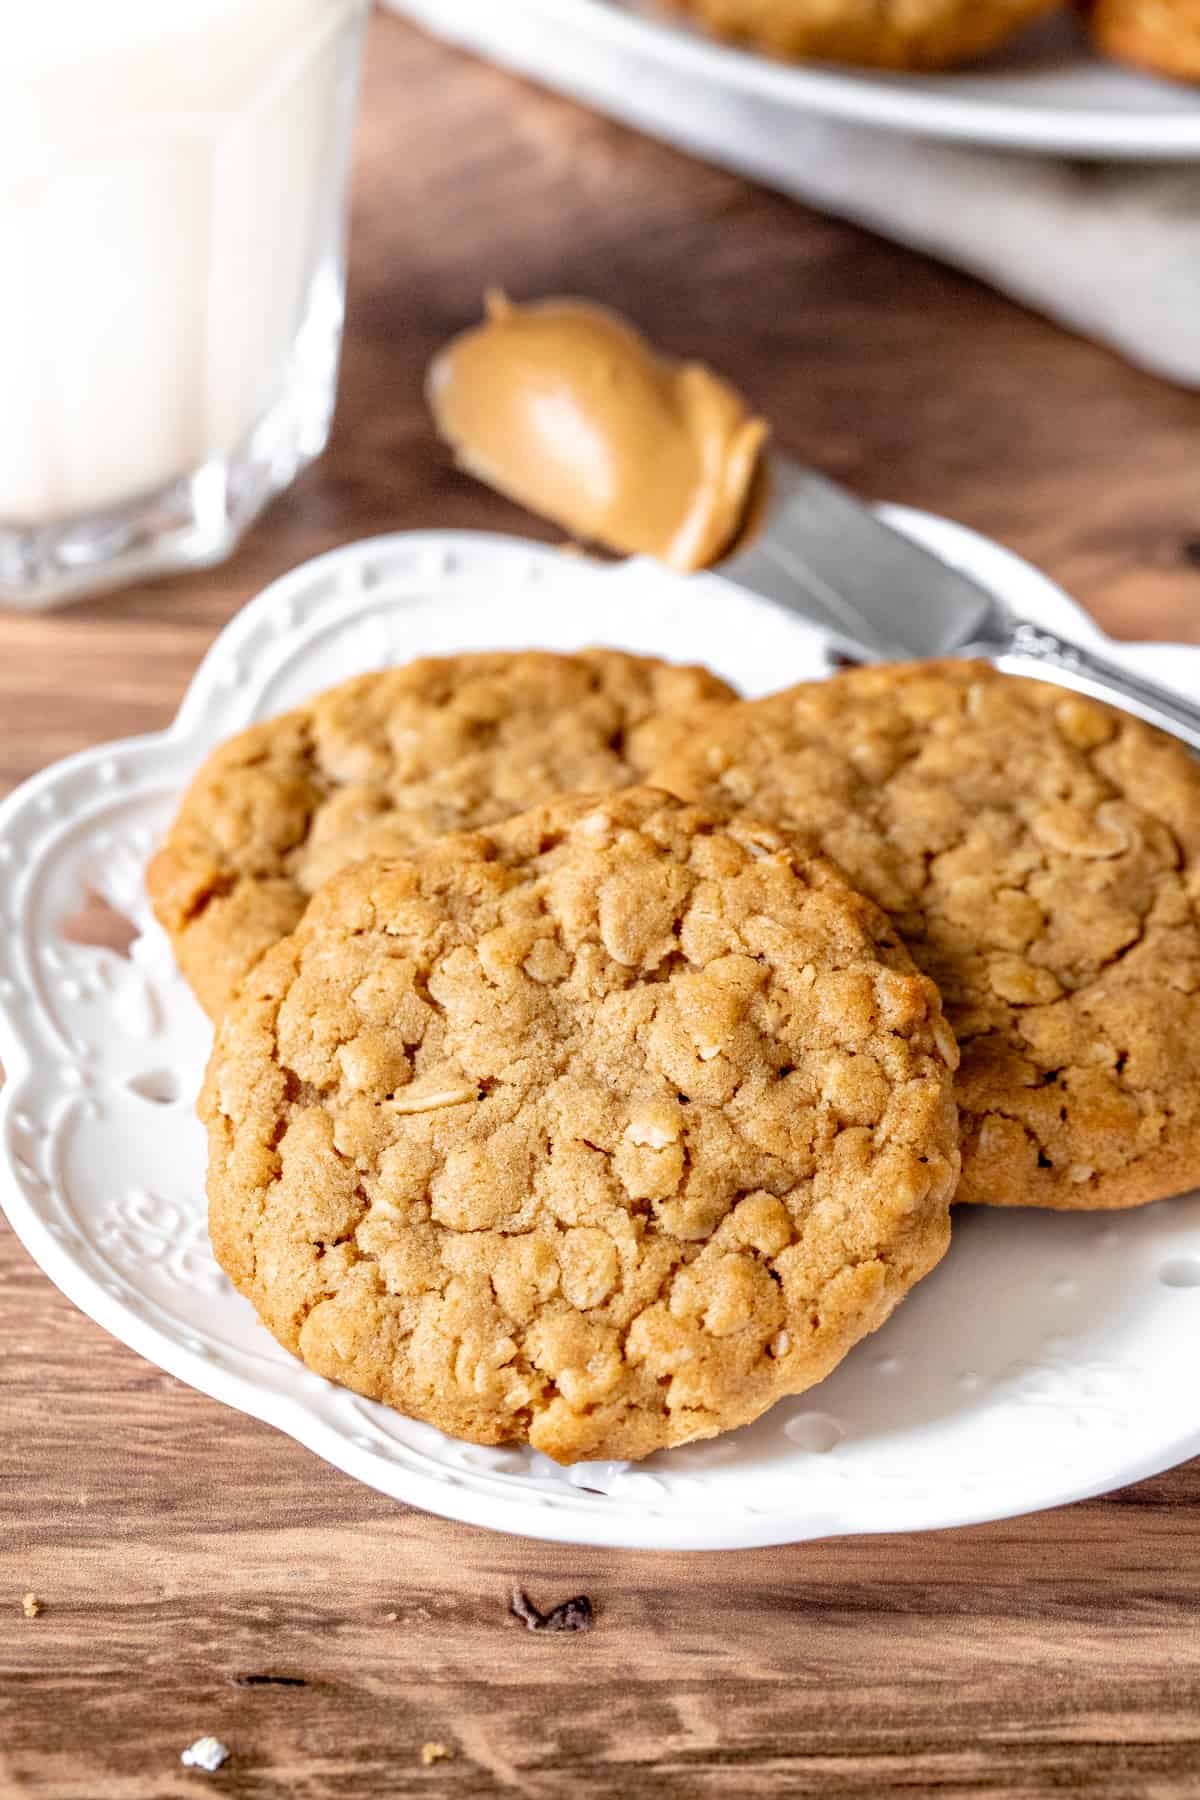 Plate of 3 peanut butter cookies made with oats.